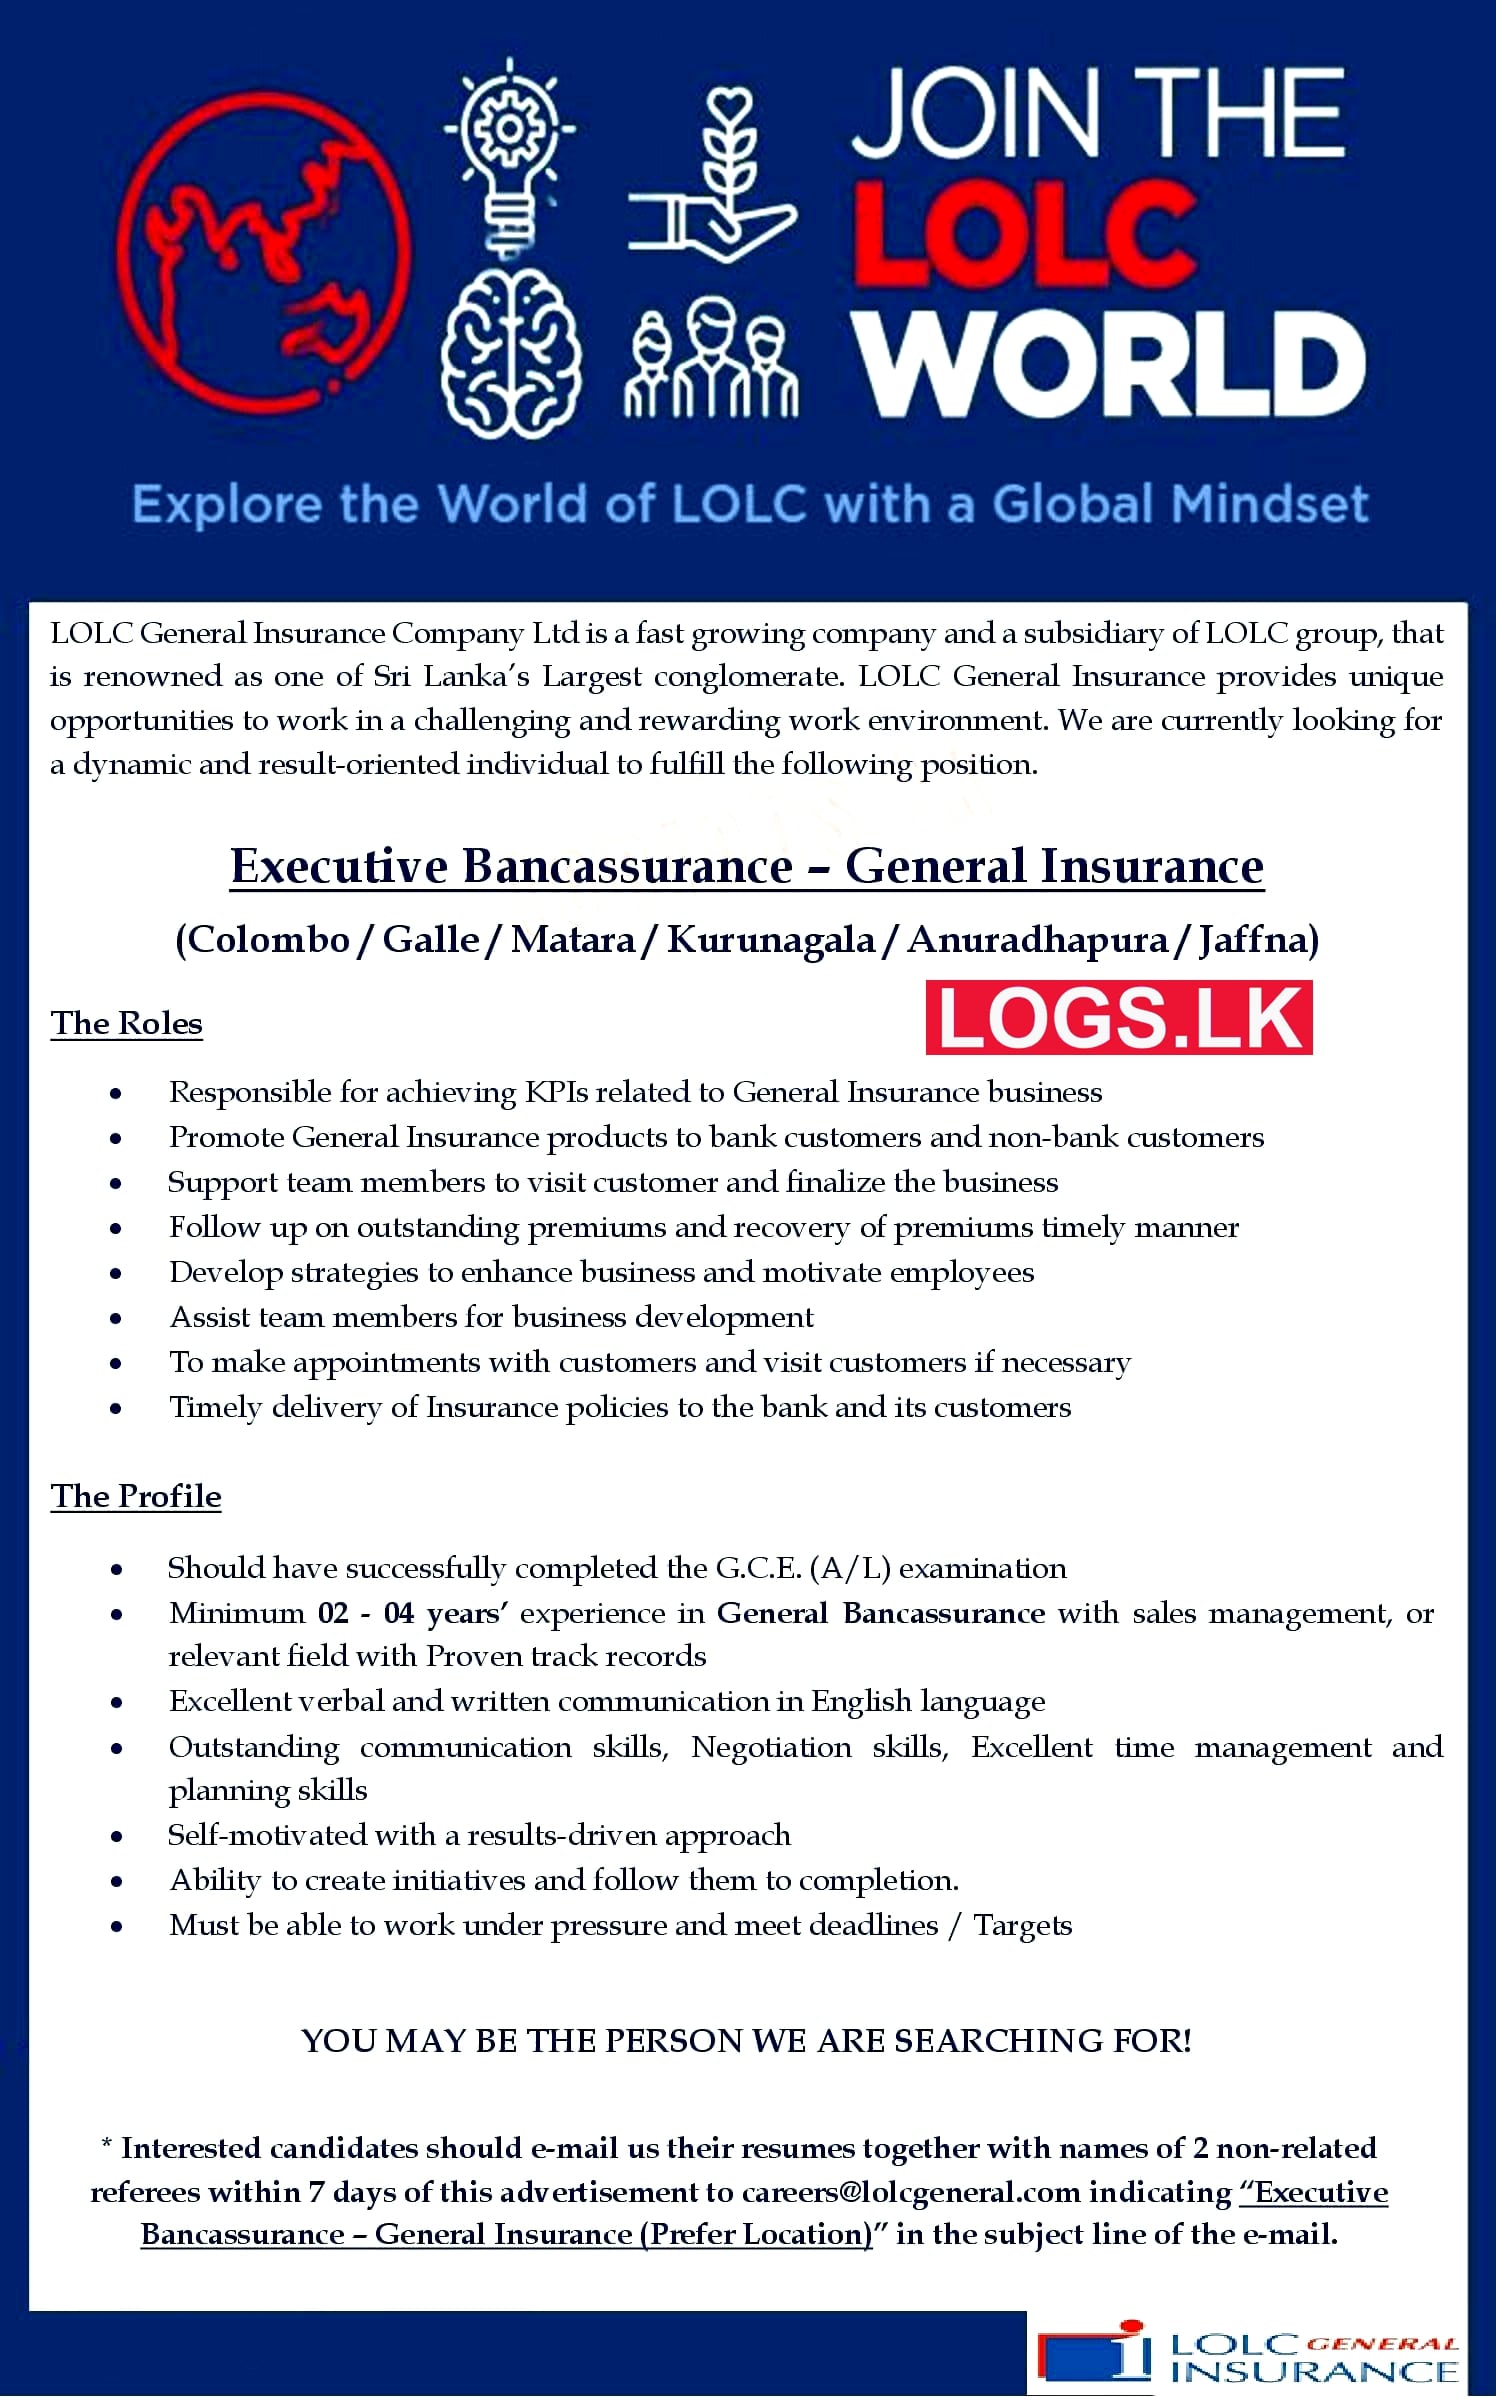 Executives (General Insurance) - LOLC Holdings Vacancies 2023 Application Form, Details Download